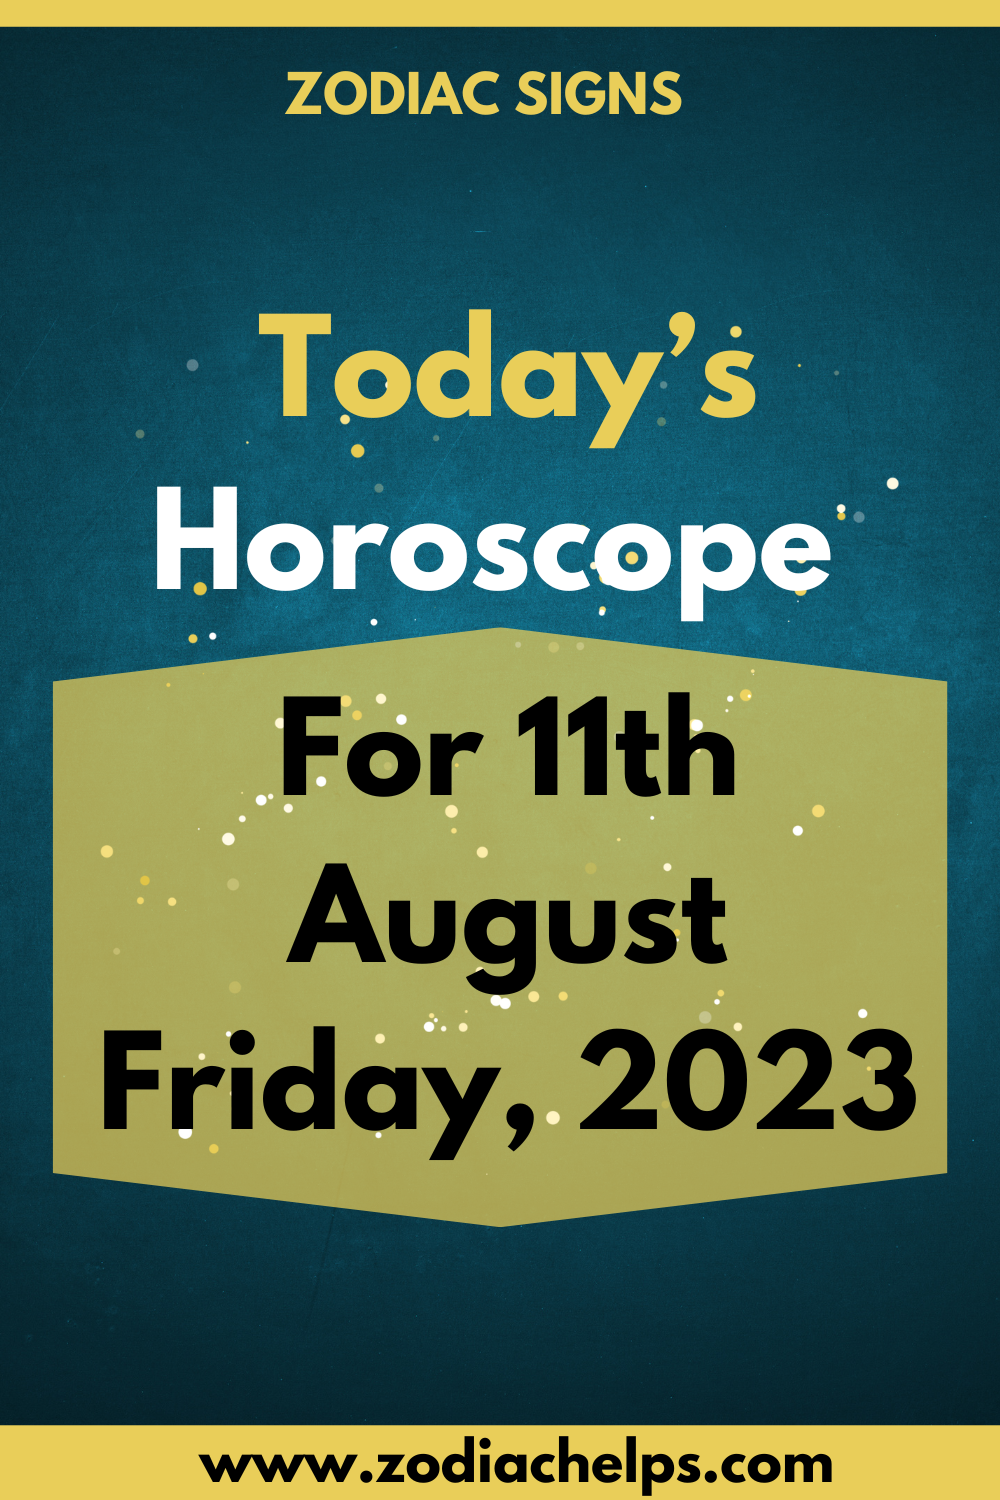 Today’s Horoscope for 11th August Friday, 2023